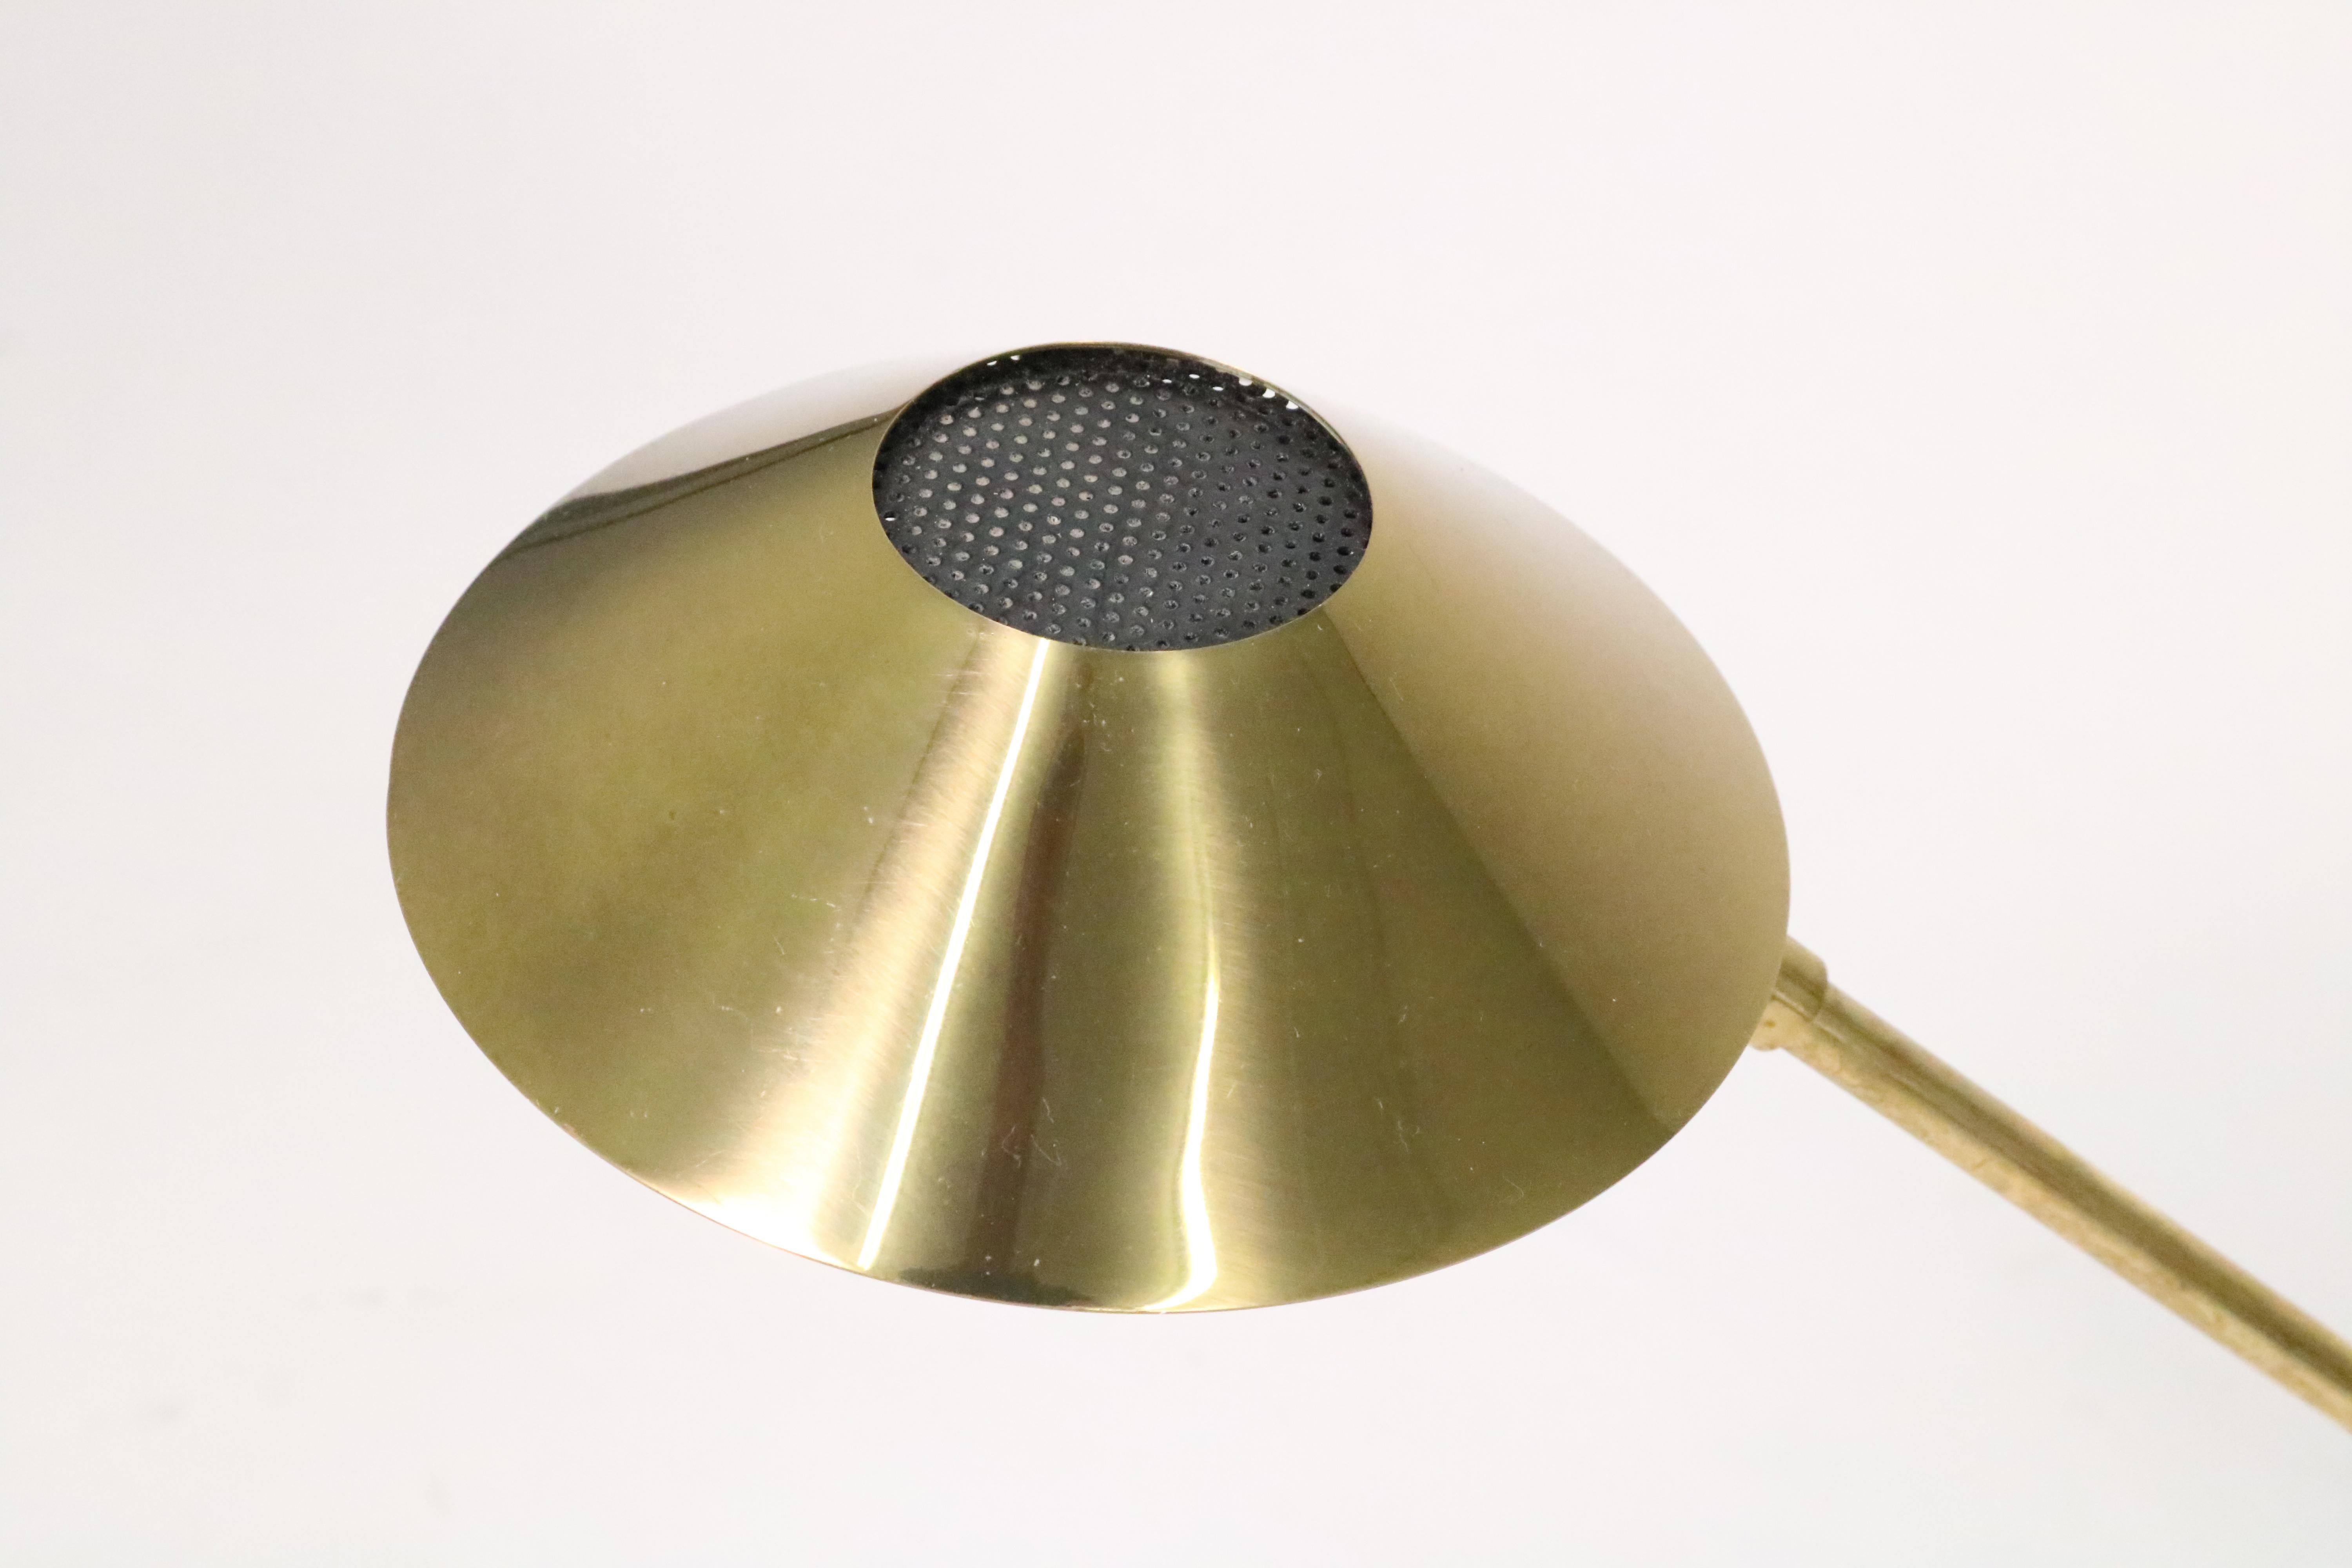 A handsome mid-century brass desk lamp. Shade rotates slightly left or right. One high-intensity bulb.